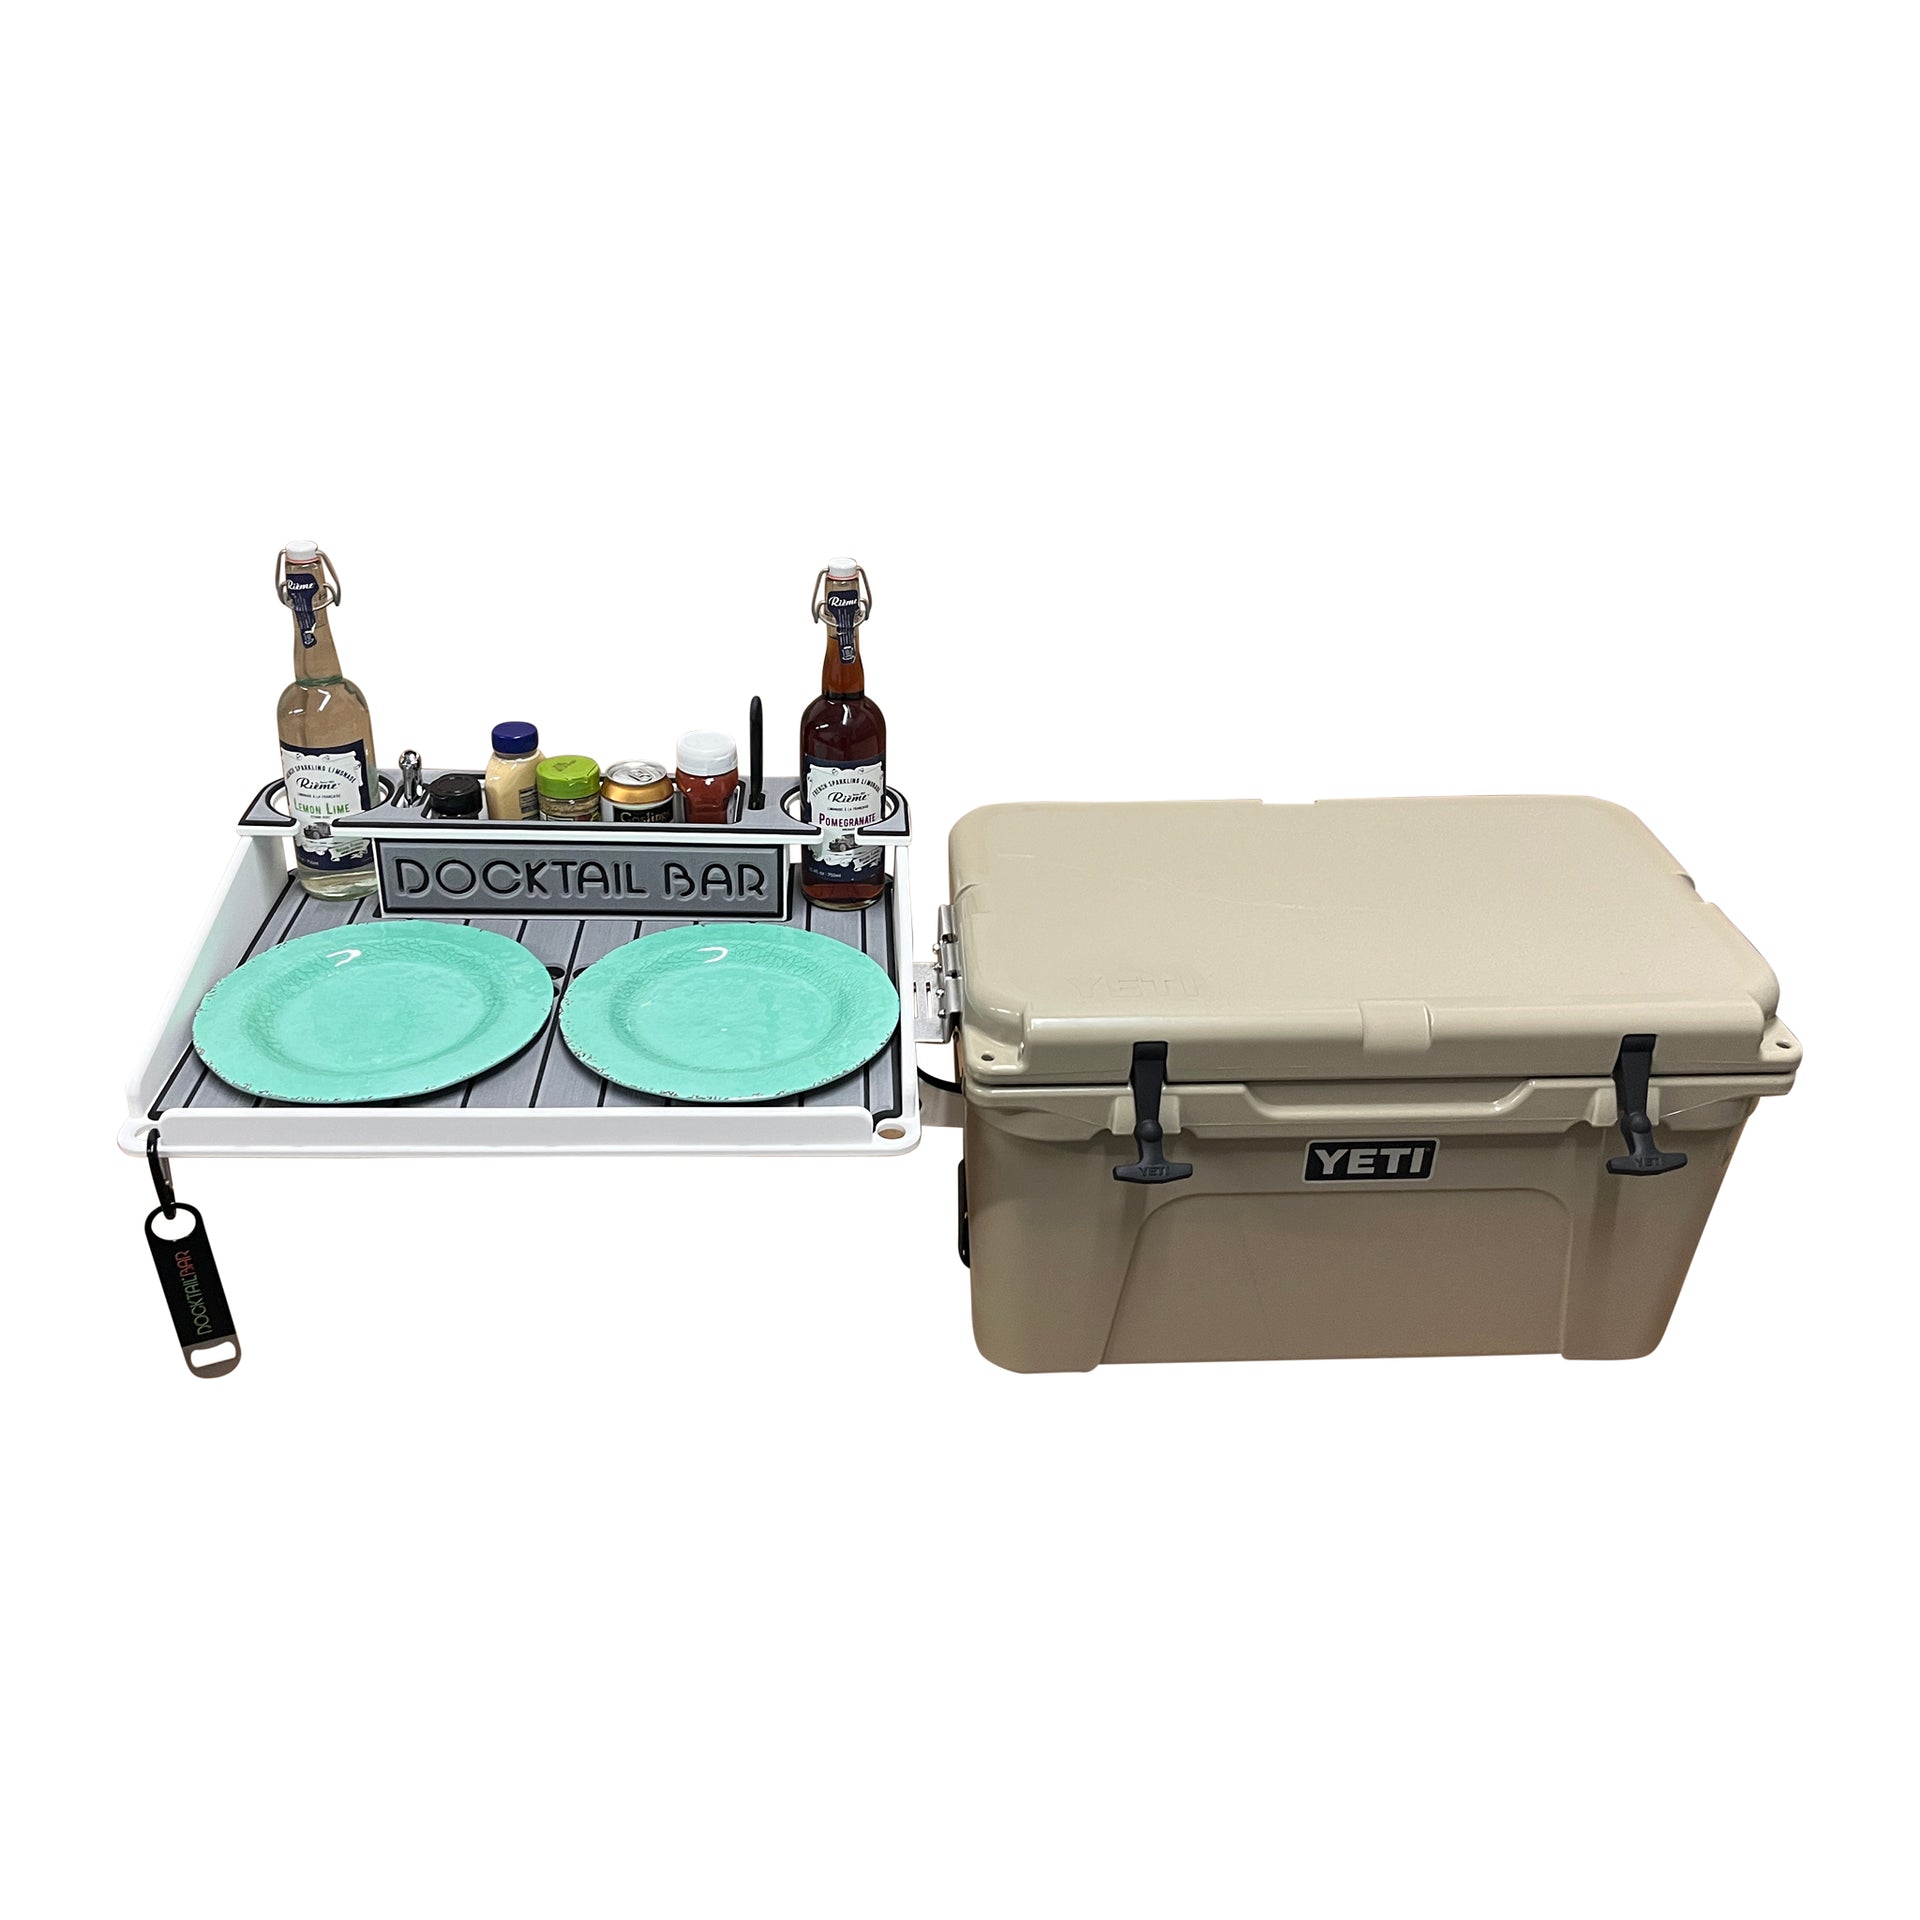 Docktail Bar Yeti Tundra Cooler Mount and Table System